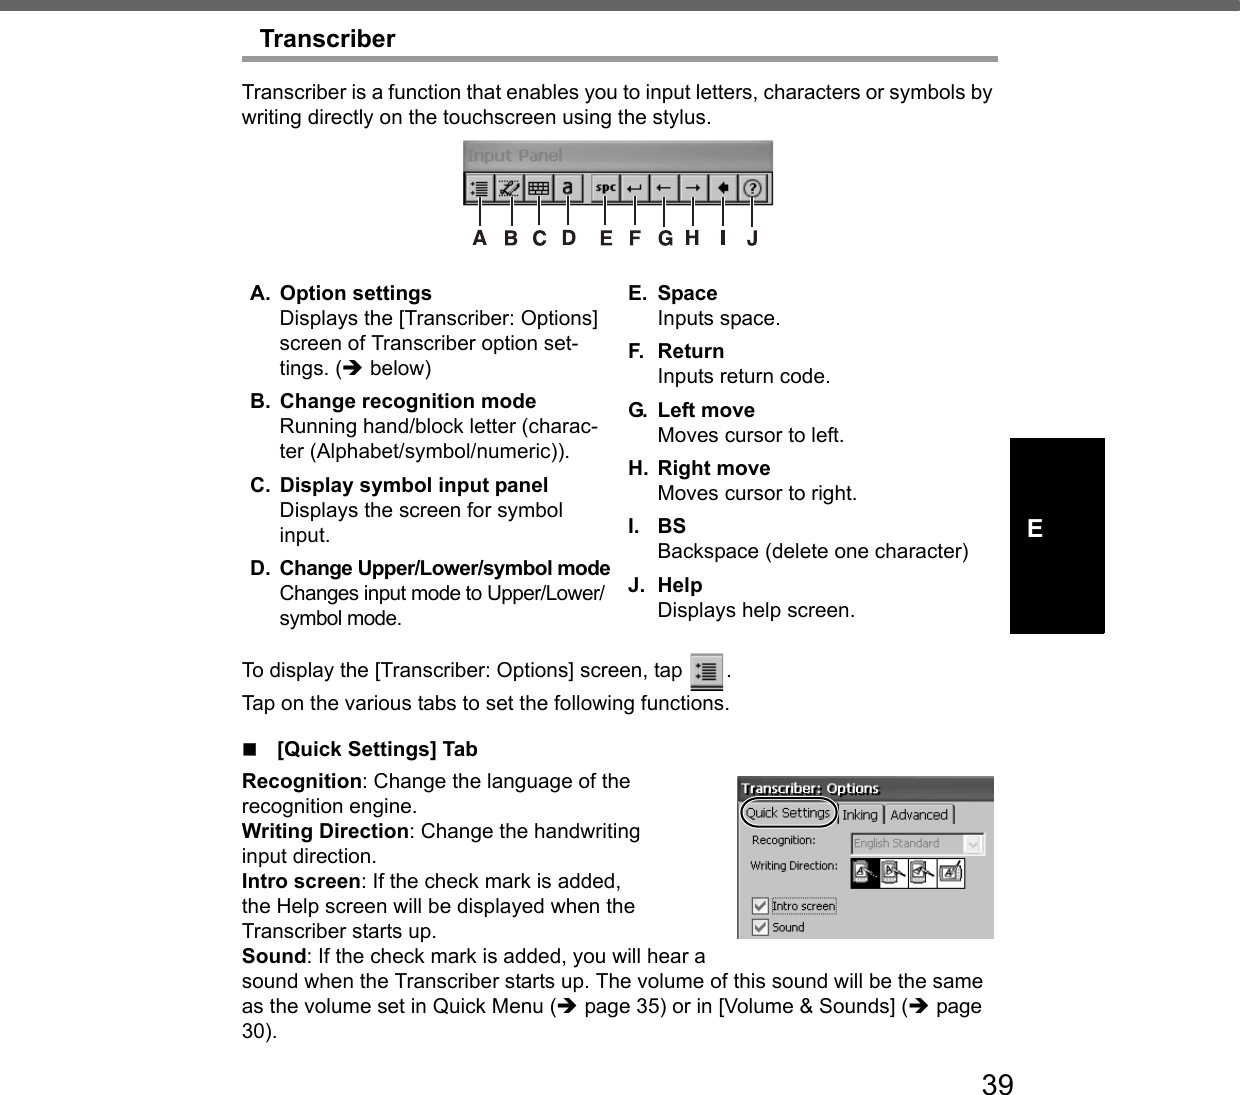 39ETranscriberTranscriber is a function that enables you to input letters, characters or symbols by writing directly on the touchscreen using the stylus.To display the [Transcriber: Options] screen, tap  .Tap on the various tabs to set the following functions.[Quick Settings] TabRecognition: Change the language of therecognition engine. Writing Direction: Change the handwritinginput direction. Intro screen: If the check mark is added, the Help screen will be displayed when theTranscriber starts up. Sound: If the check mark is added, you will hear a sound when the Transcriber starts up. The volume of this sound will be the same as the volume set in Quick Menu (Îpage 35) or in [Volume &amp; Sounds] (Îpage 30). A. Option settingsDisplays the [Transcriber: Options] screen of Transcriber option set-tings. (Î below) B. Change recognition modeRunning hand/block letter (charac-ter (Alphabet/symbol/numeric)).C. Display symbol input panelDisplays the screen for symbol input.D. Change Upper/Lower/symbol modeChanges input mode to Upper/Lower/symbol mode.E. SpaceInputs space.F. Re turnInputs return code.G. Left moveMoves cursor to left.H. Right moveMoves cursor to right.I. BSBackspace (delete one character)J. HelpDisplays help screen.